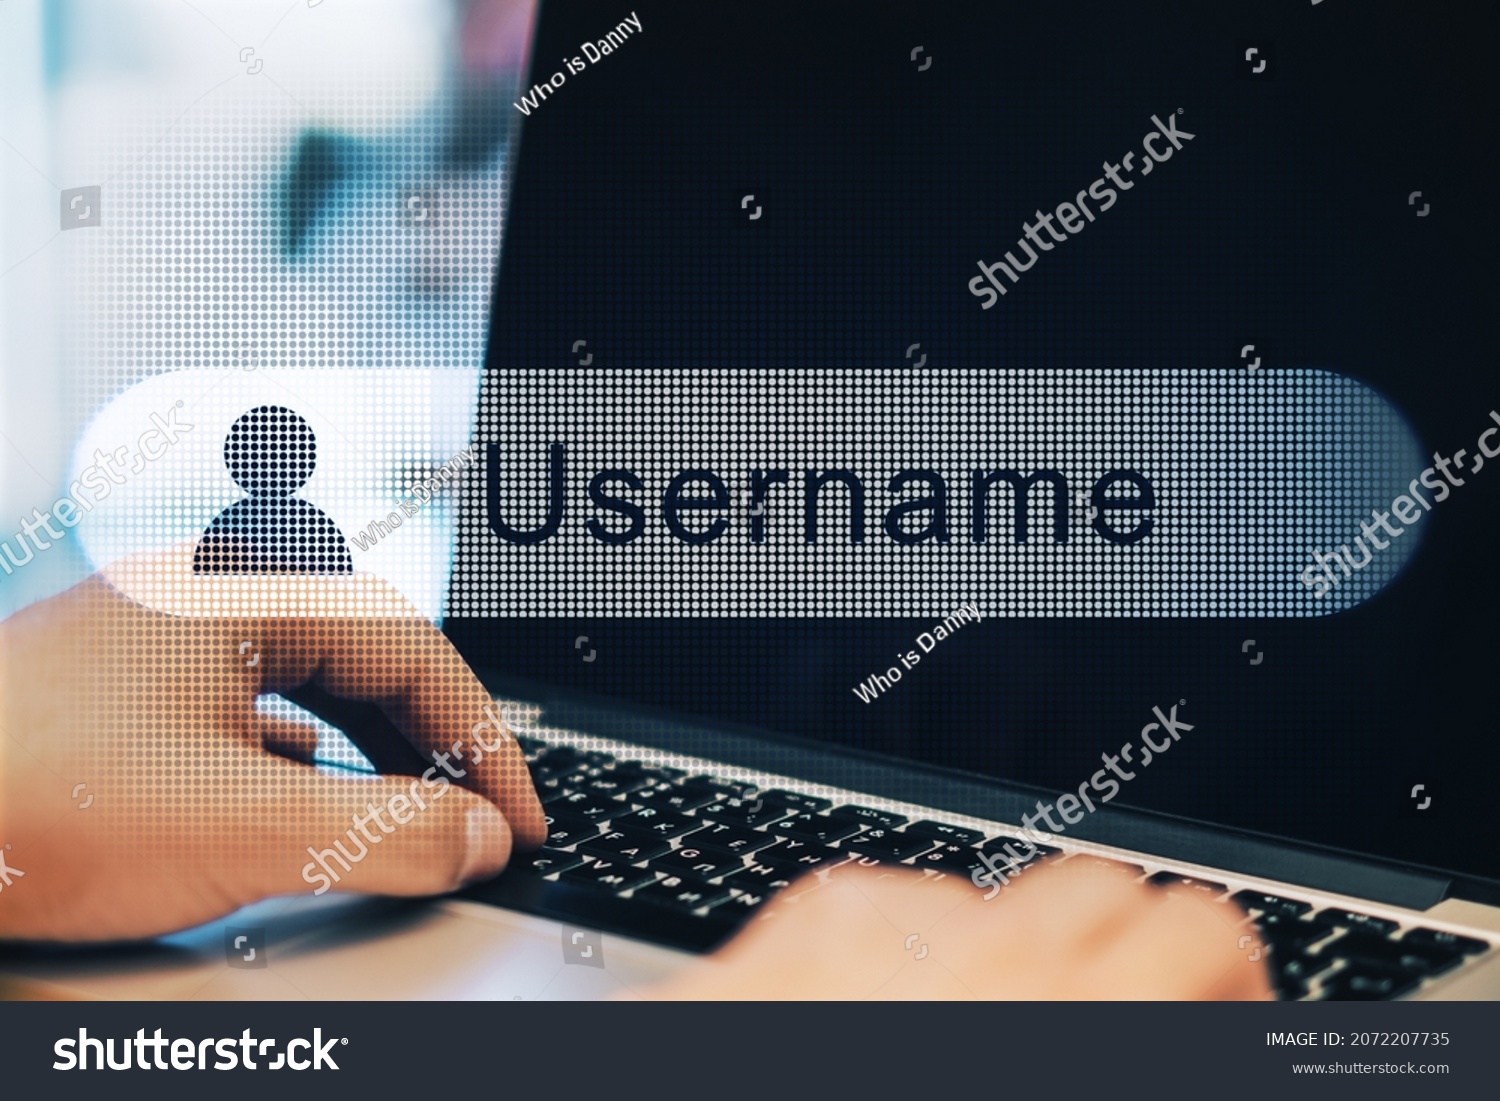 Close up of businessman hands using laptop with creative username bar on blurry outdoor background. Data and information concept. Double exposure #2072207735